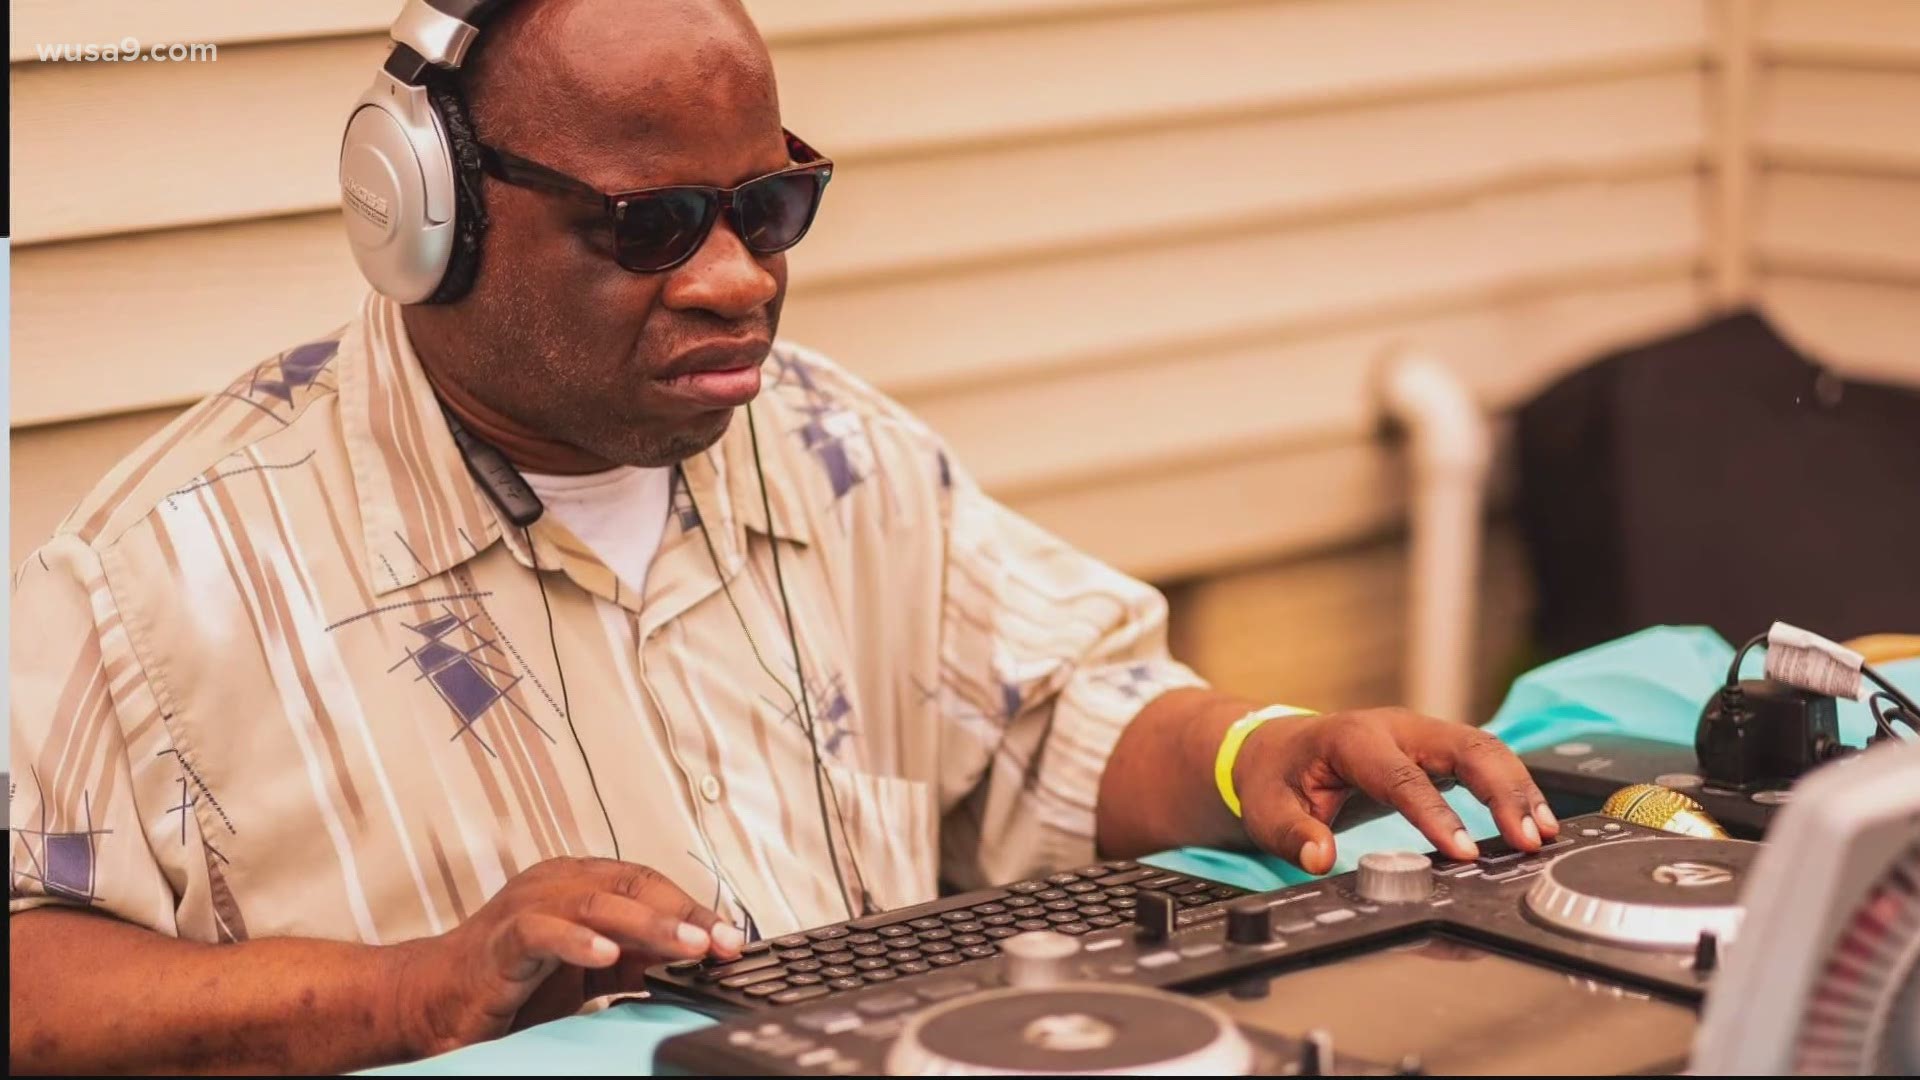 DJ Double M won't let visual challenges keep him from doing what he loves.